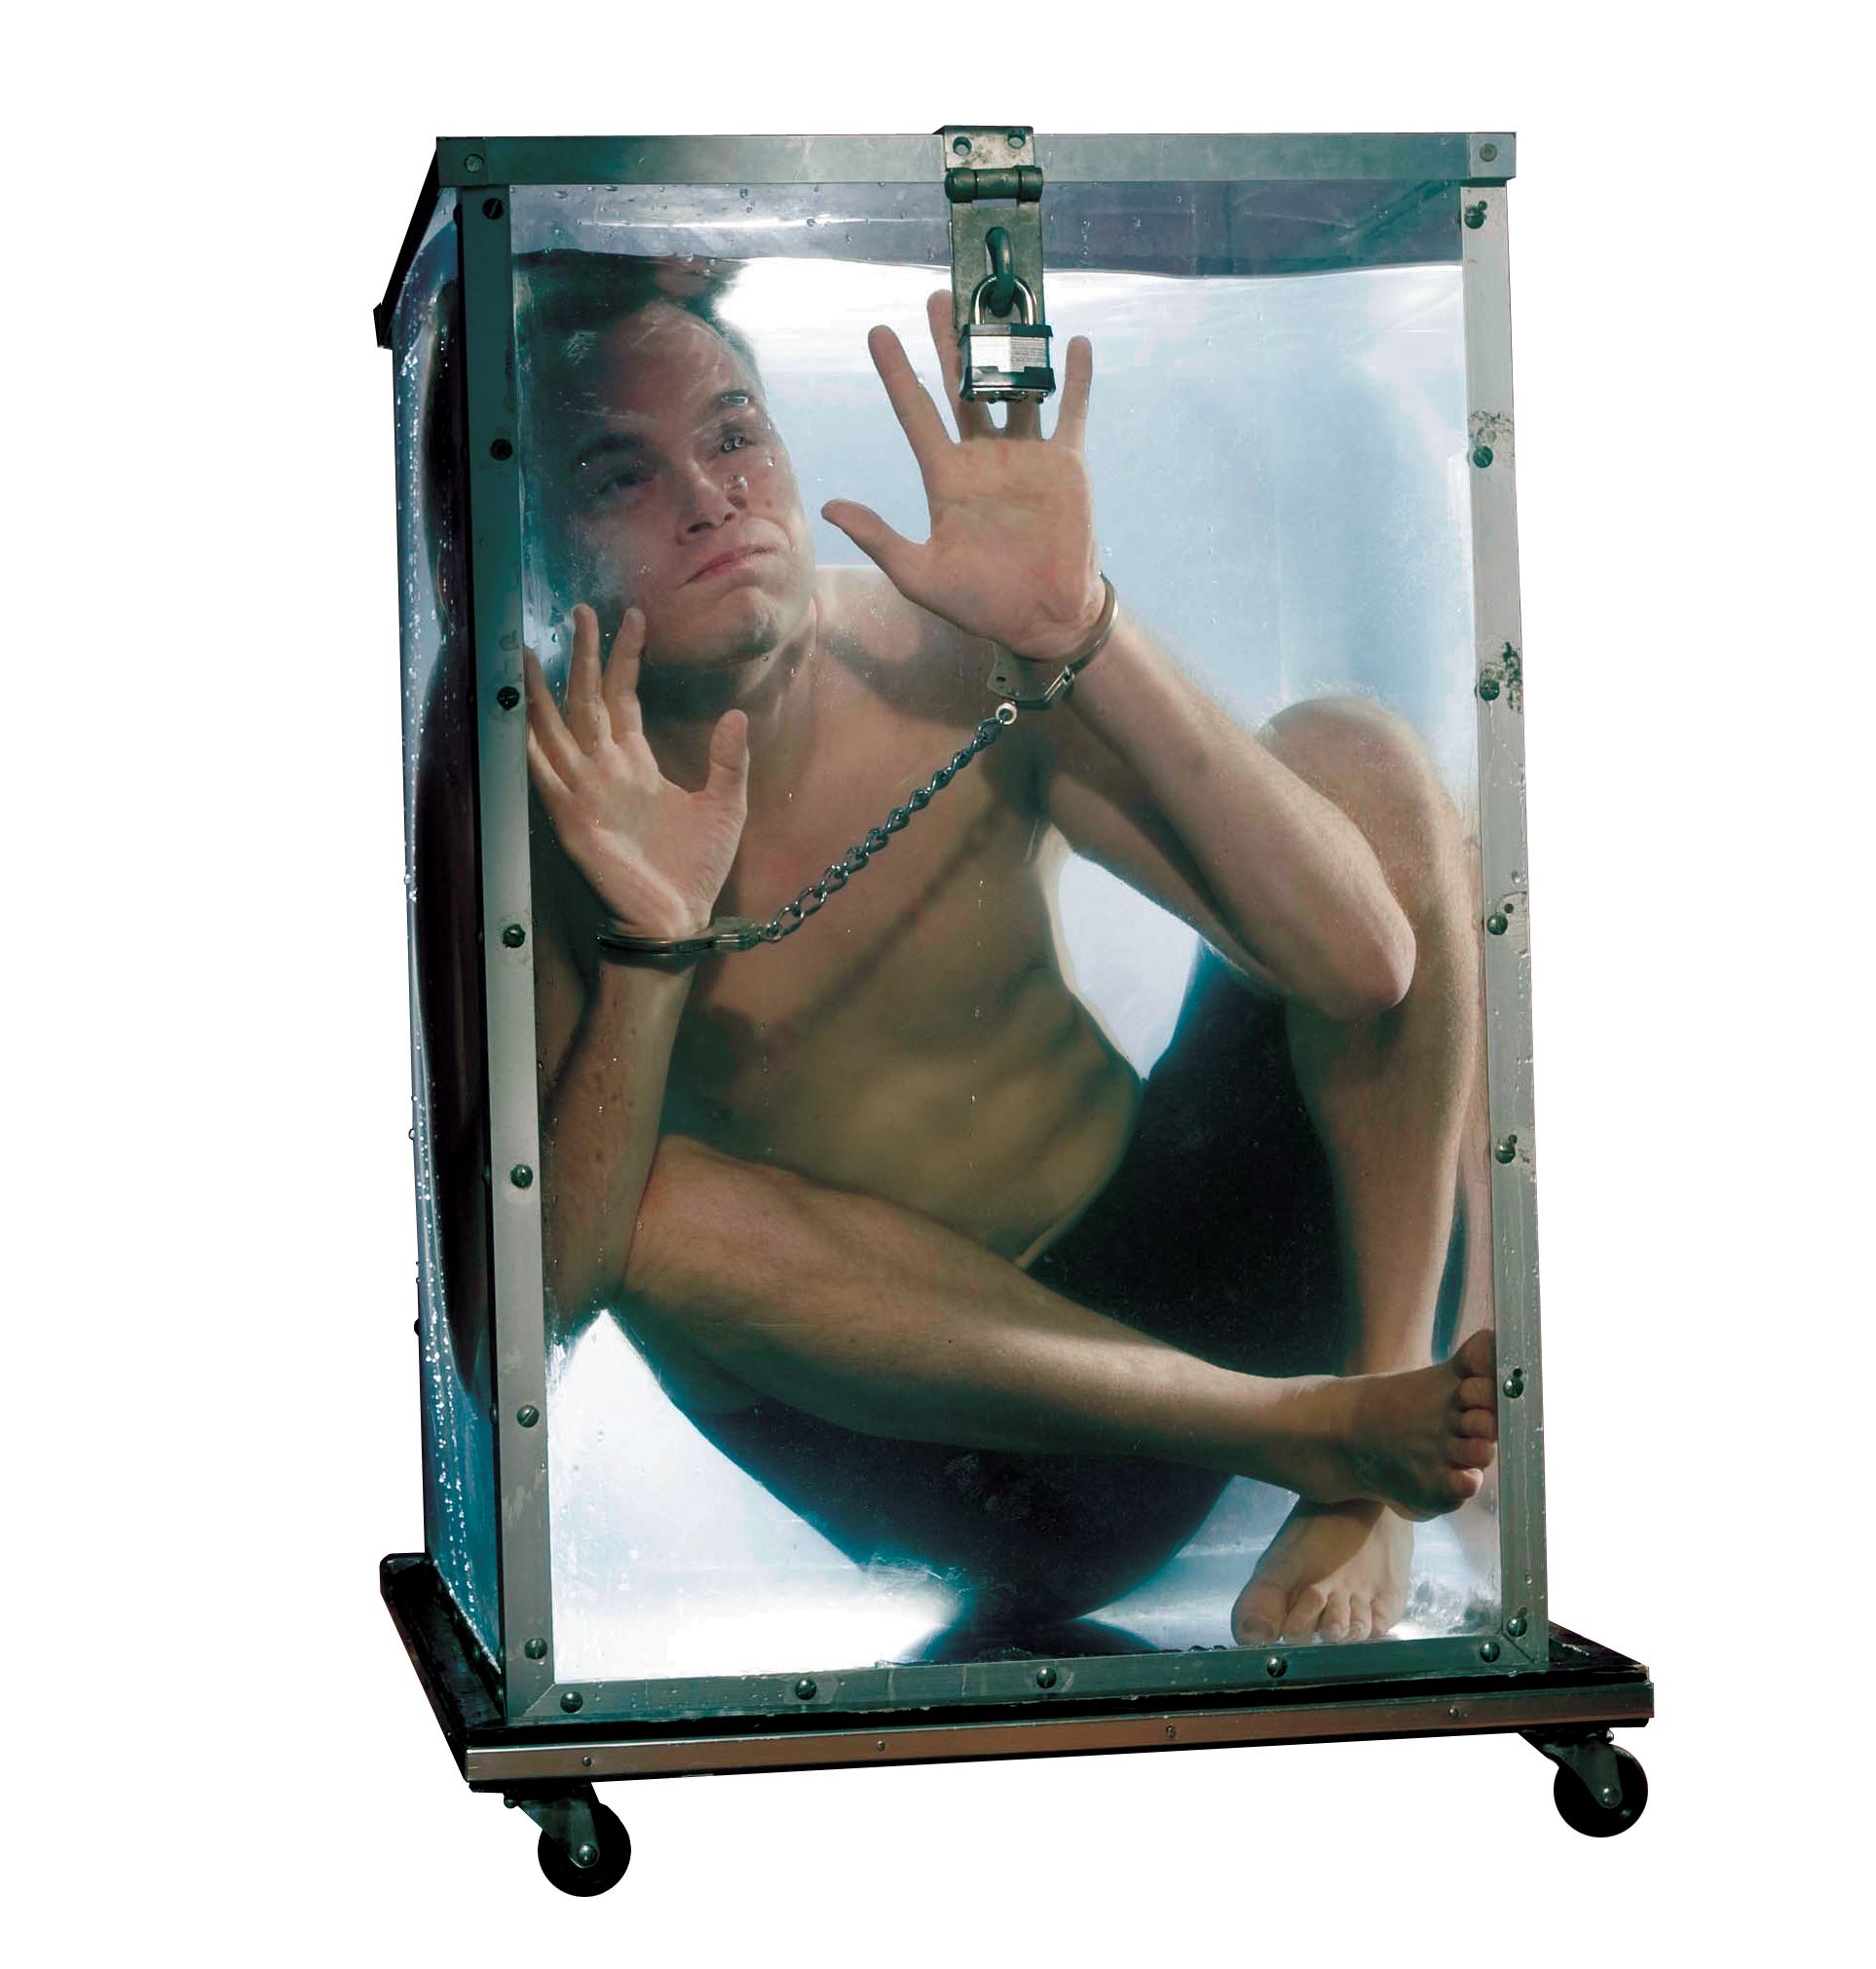 Escape Artist Curtis Lovell II locked into a box of water/water torture cell www.CurtisLovell.com